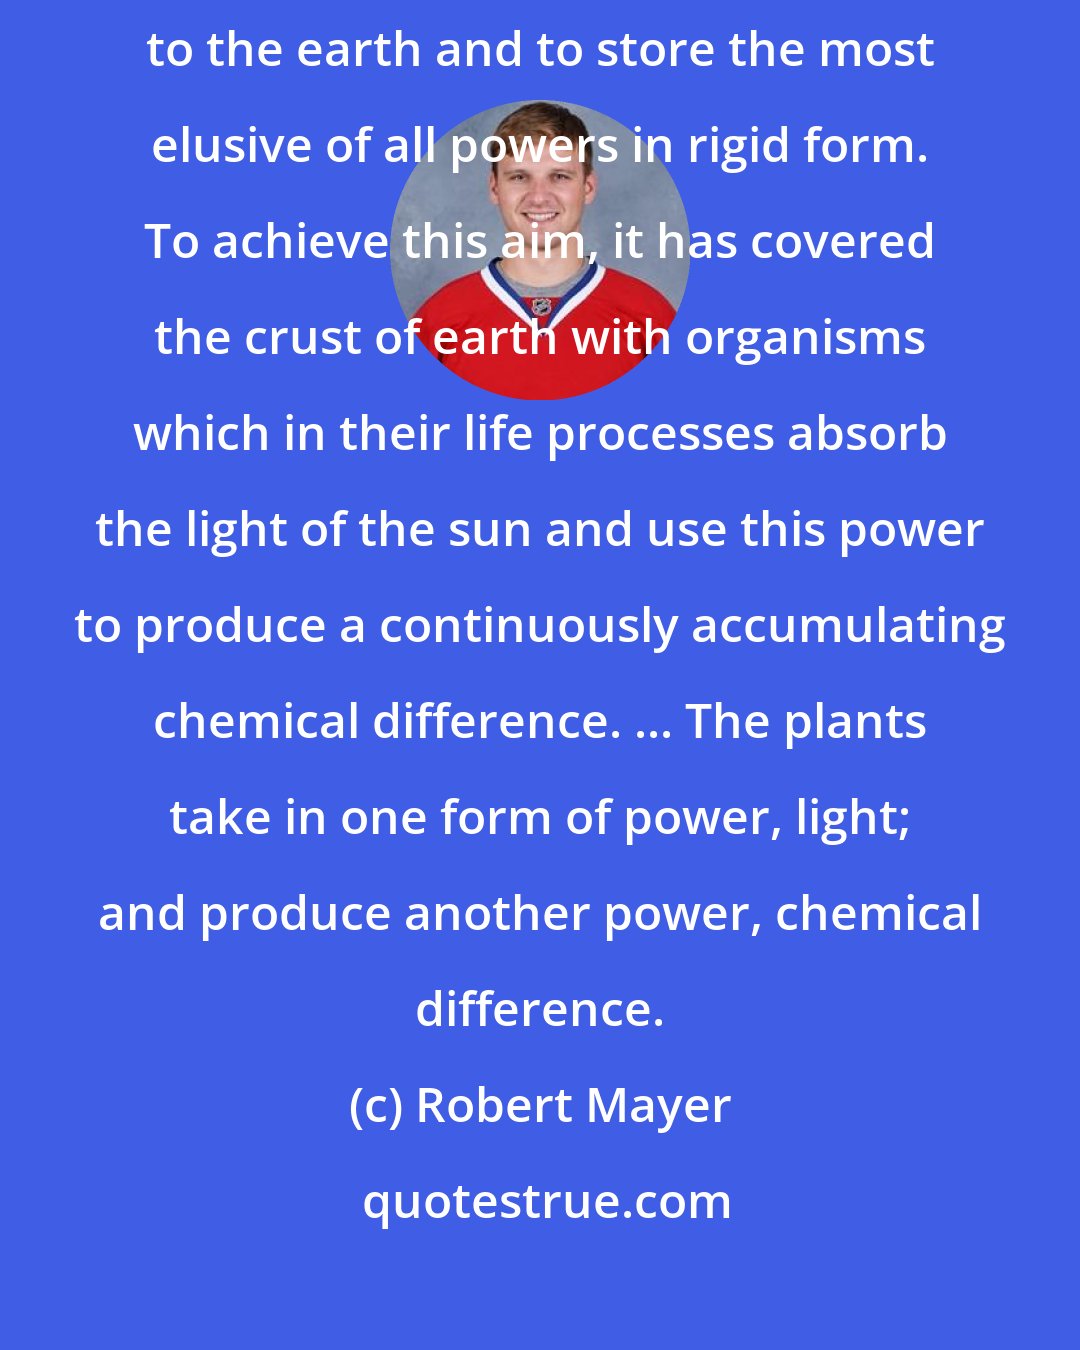 Robert Mayer: Nature has put itself the problem how to catch in flight light streaming to the earth and to store the most elusive of all powers in rigid form. To achieve this aim, it has covered the crust of earth with organisms which in their life processes absorb the light of the sun and use this power to produce a continuously accumulating chemical difference. ... The plants take in one form of power, light; and produce another power, chemical difference.